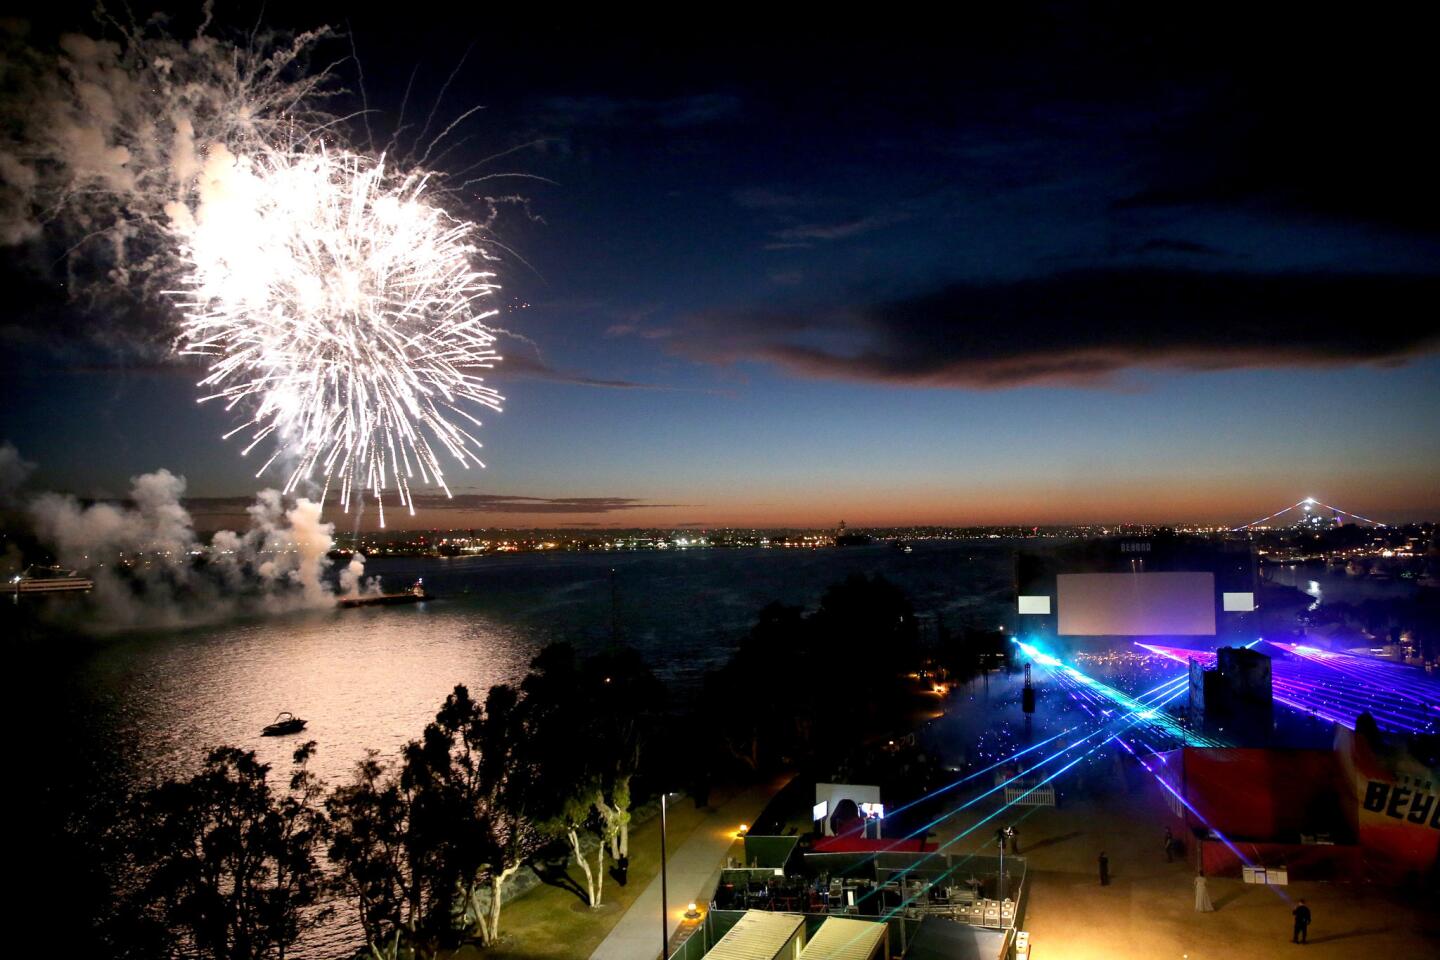 A fireworks display at the "Star Trek Beyond" premiere July 20 at Embarcadero Marina Park South in San Diego.